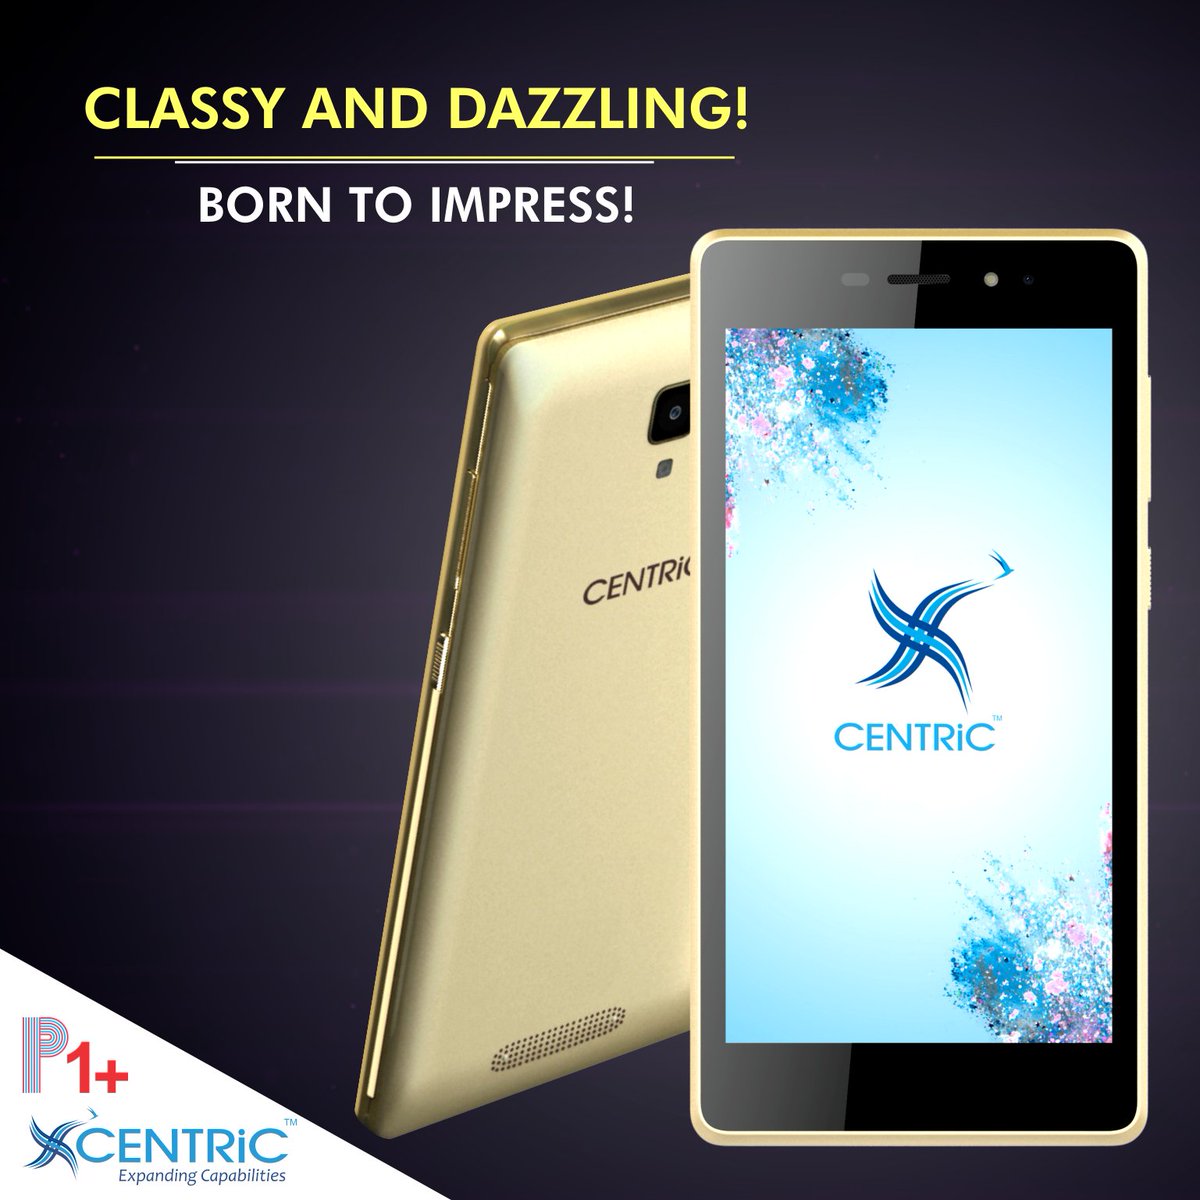 Make a bold statement by flaunting your CENTRiC P1+ Smartphone with Golden Metallic finish
#MetallicFinish #CENTRiCG1 #Classic #Stunning